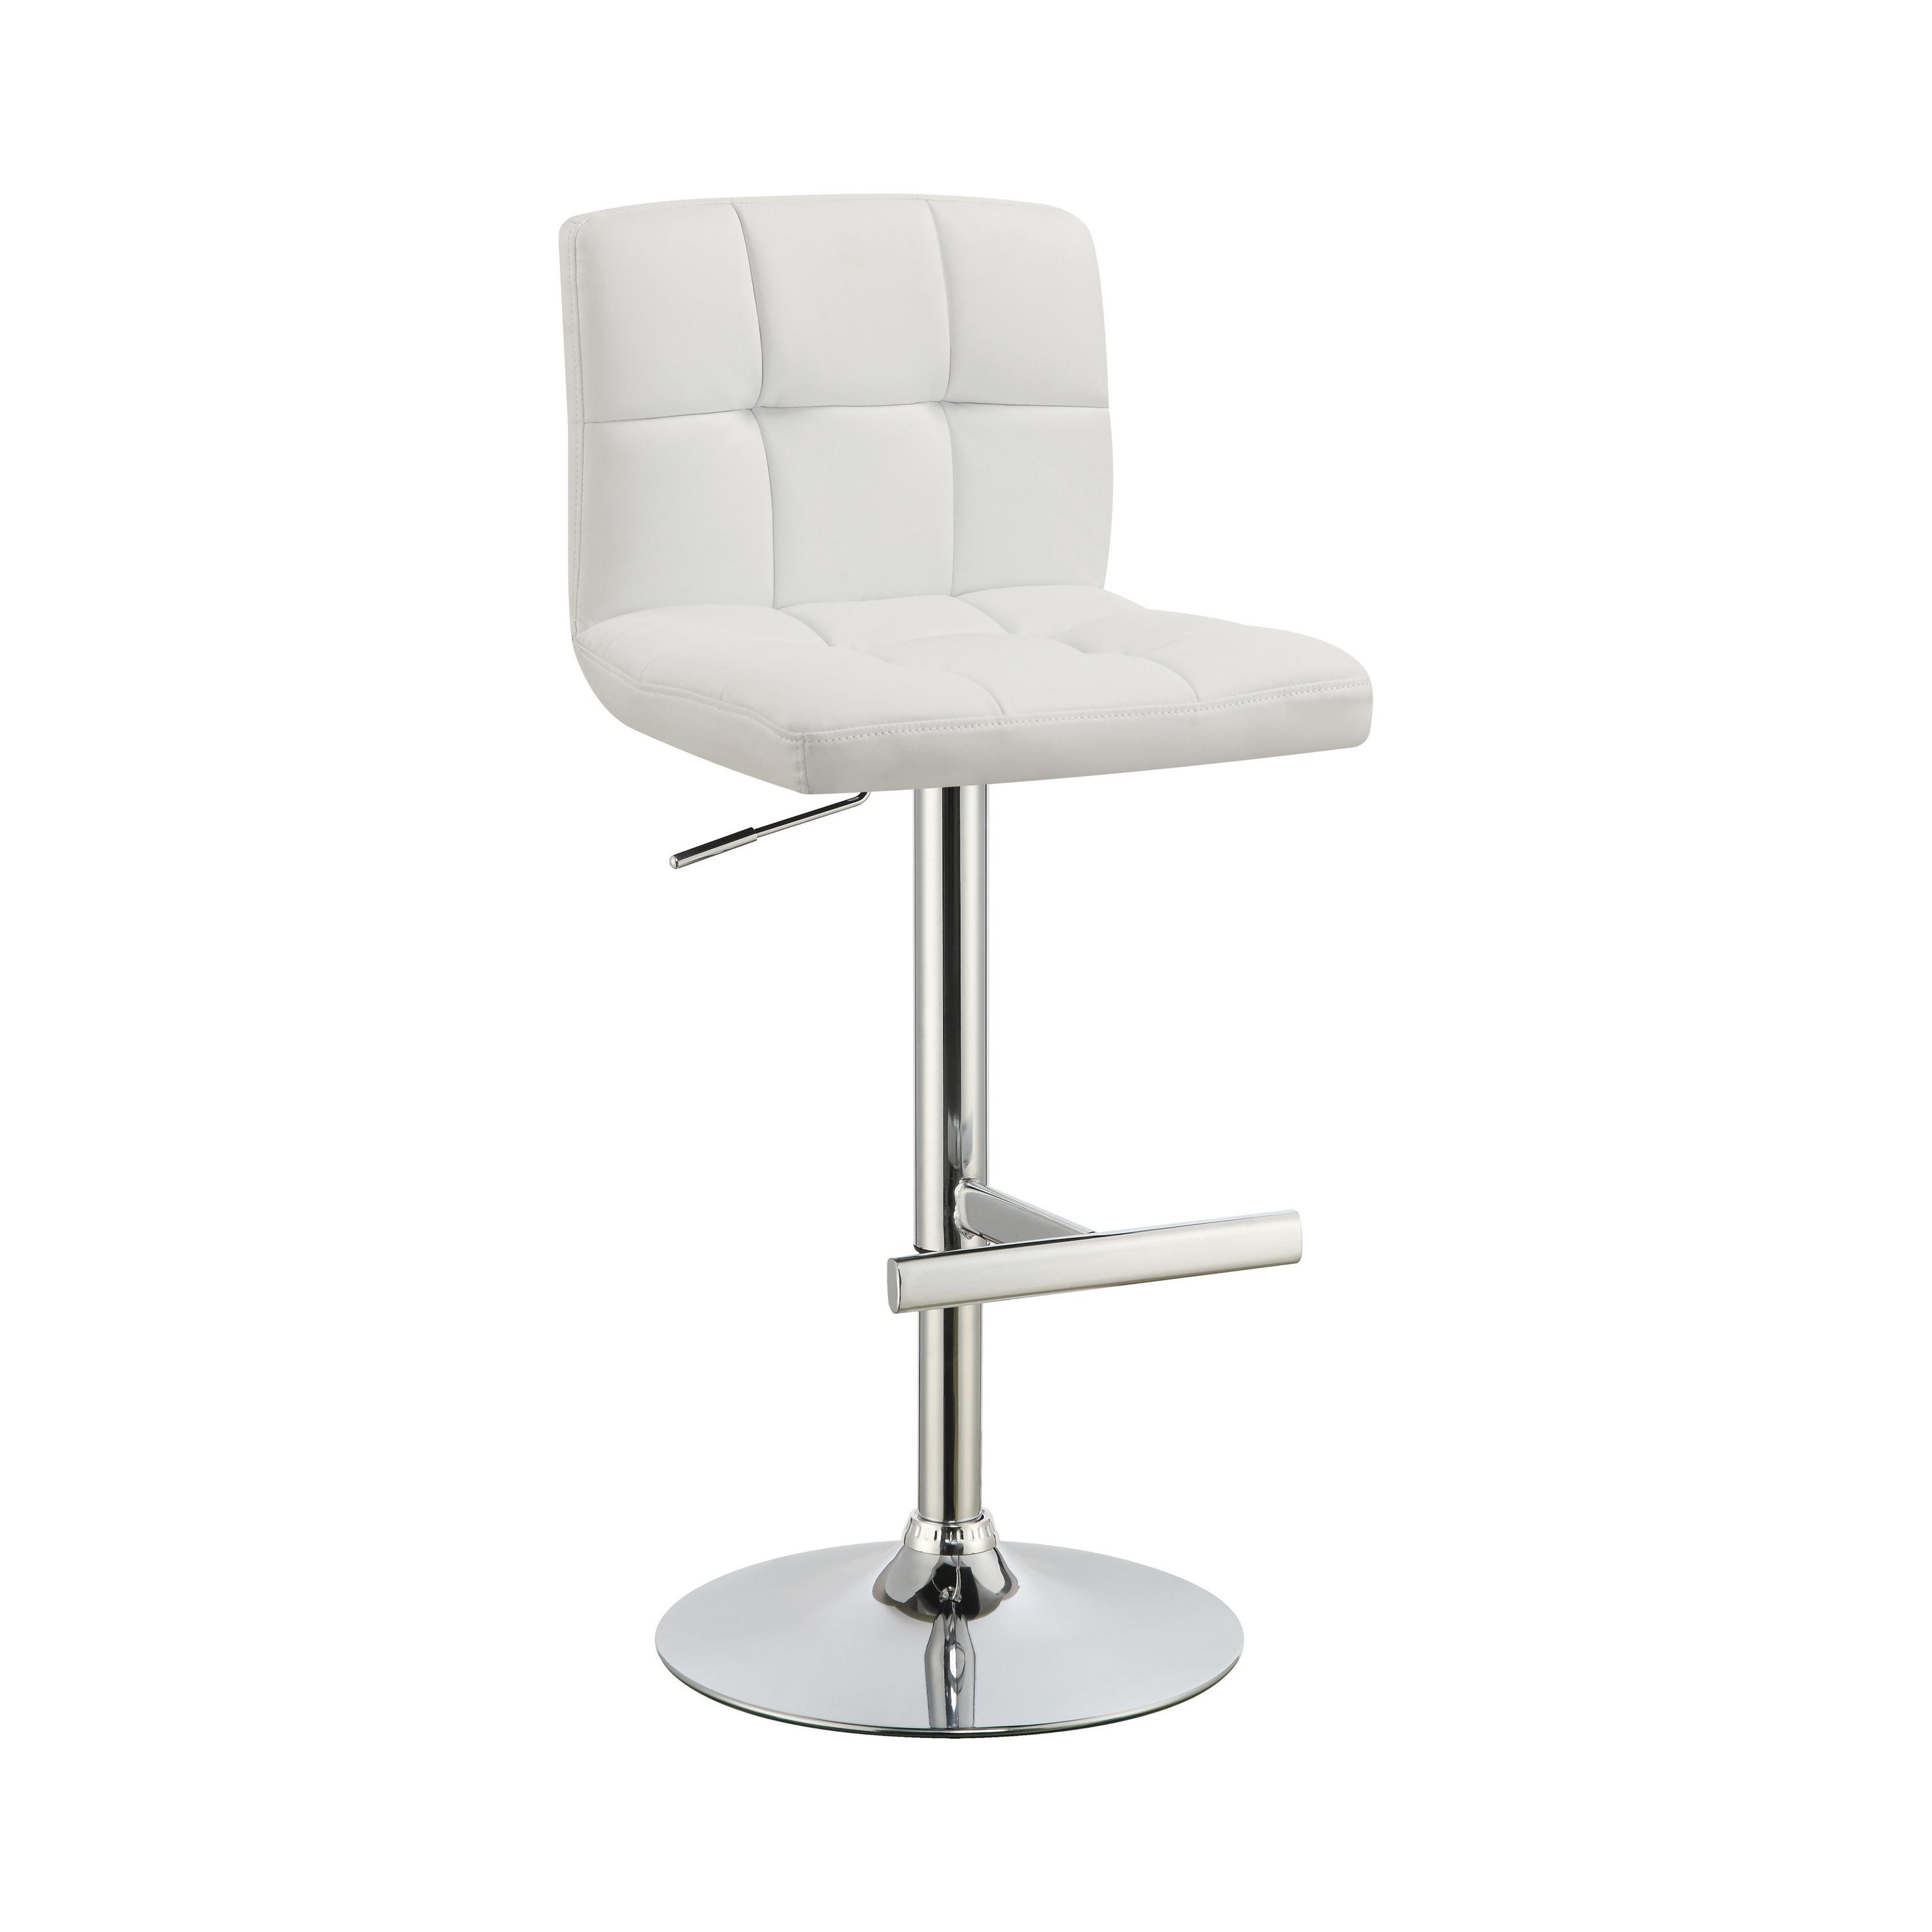 Contemporary Bar Stool Set 120356 120356 in White Leatherette